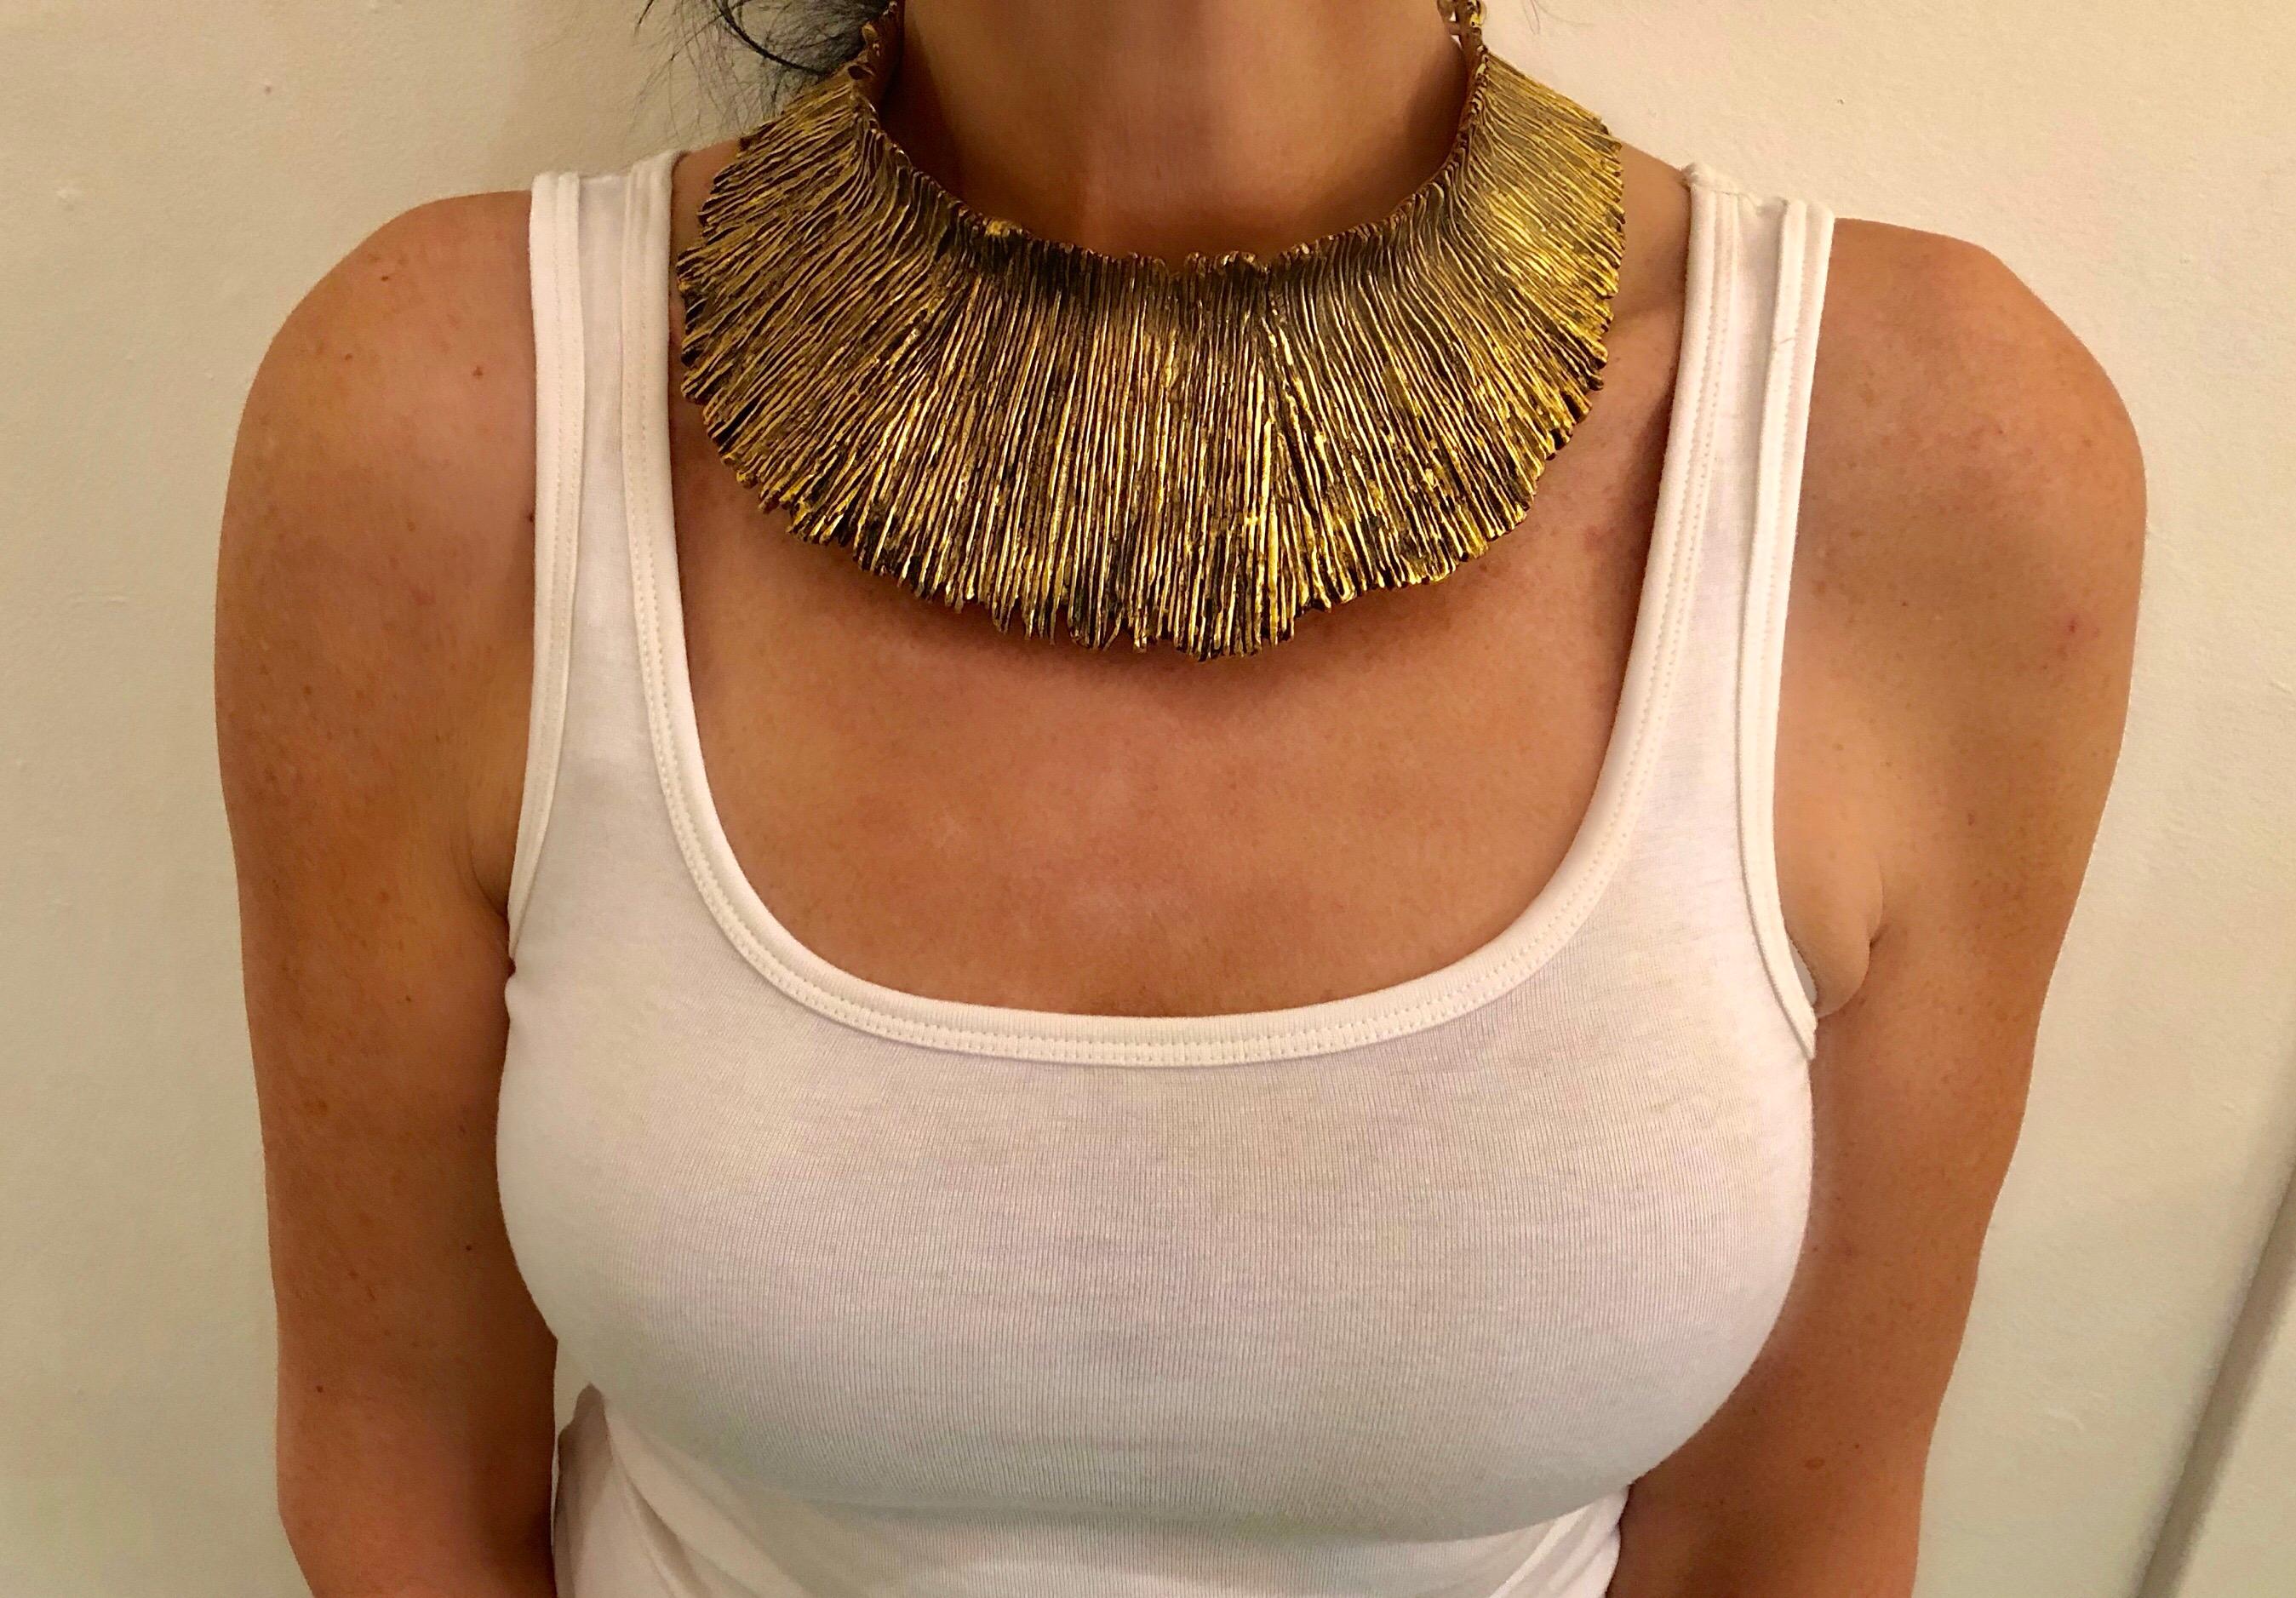 Vintage circa 1980's French brutalist/contemporary style gilt textured statement necklace by Biche de Bere Paris. The architectural collar is comprised of sculpted matte gold-tone metal with a patinaed textured pattern - signed Biche de Bere on the